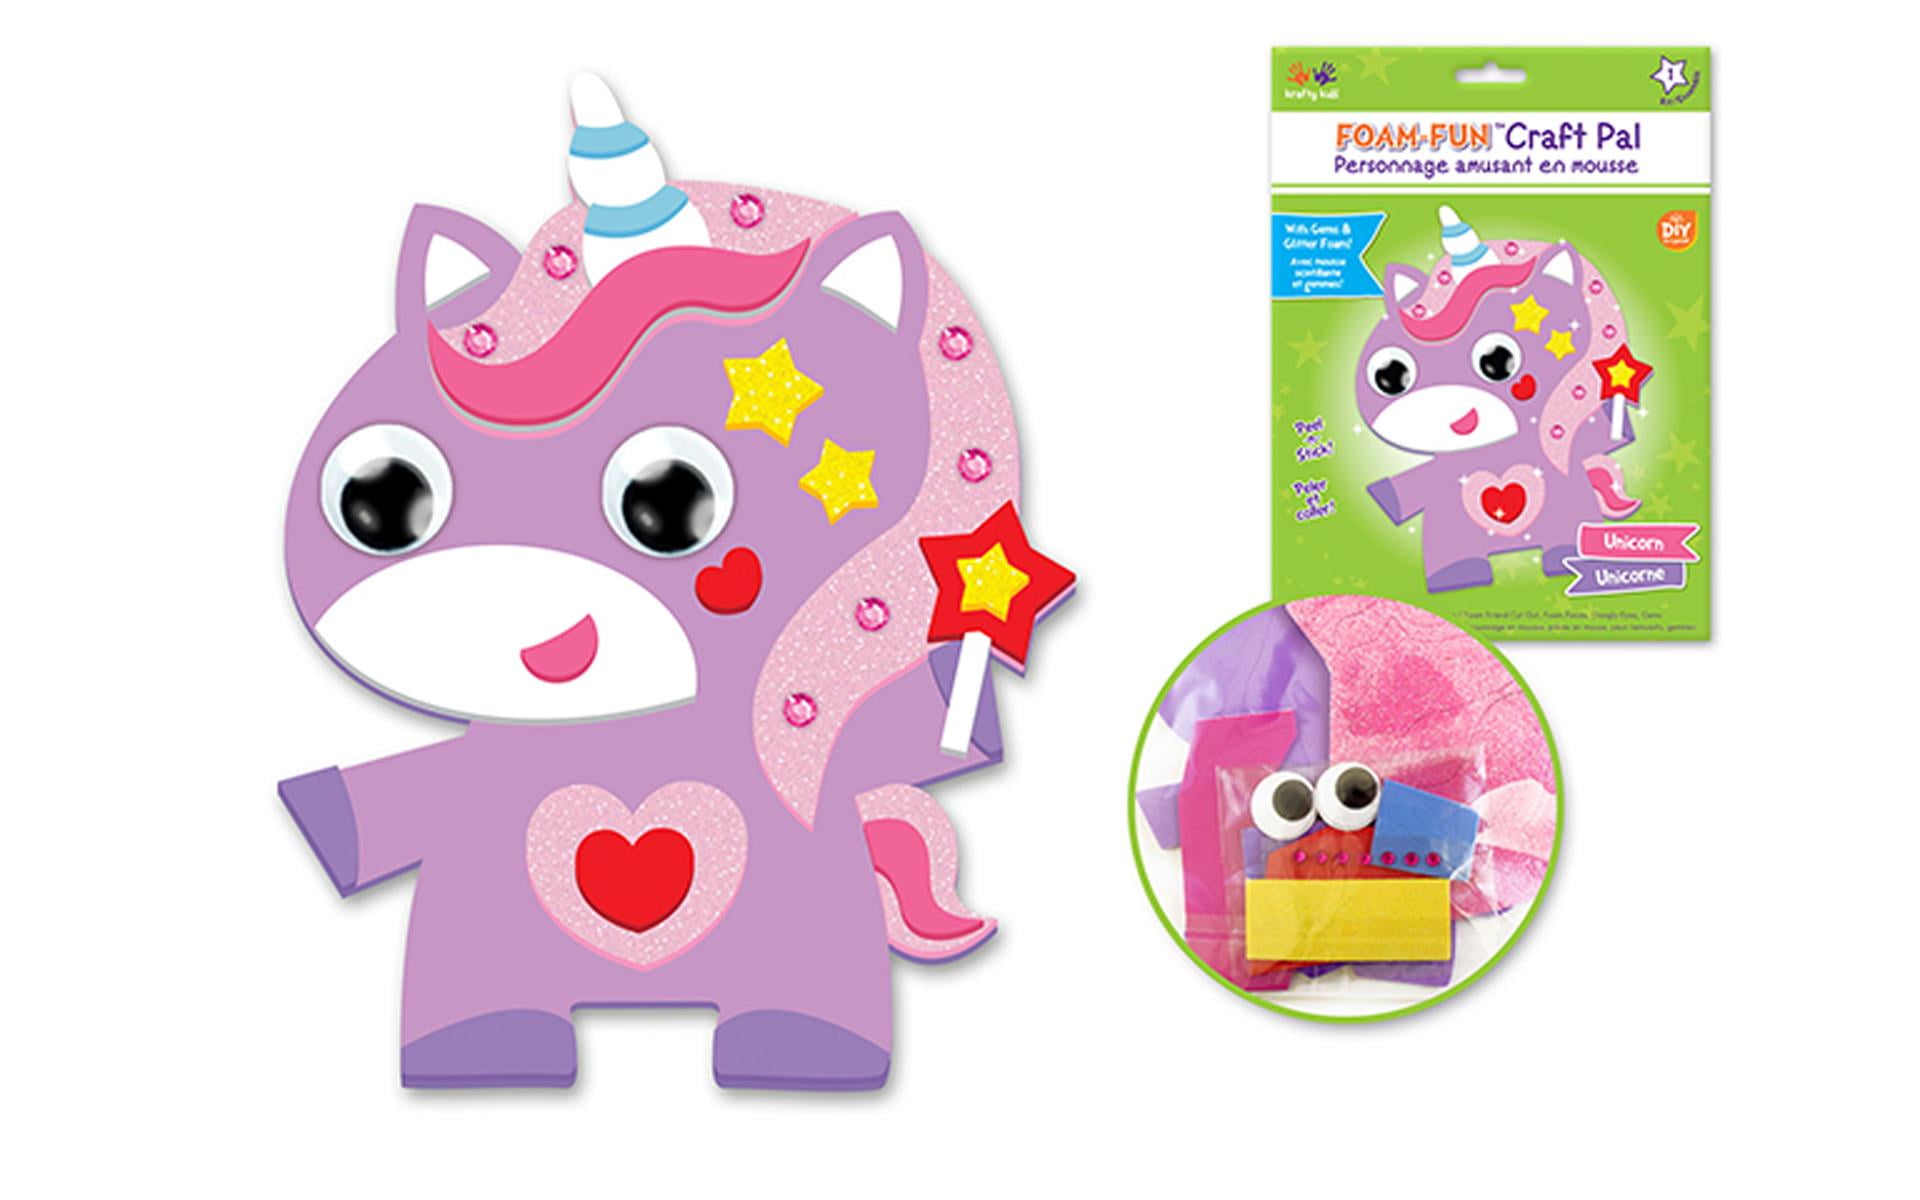  STEM-Accredited Unicorn Painting Kit for Kids - Paint